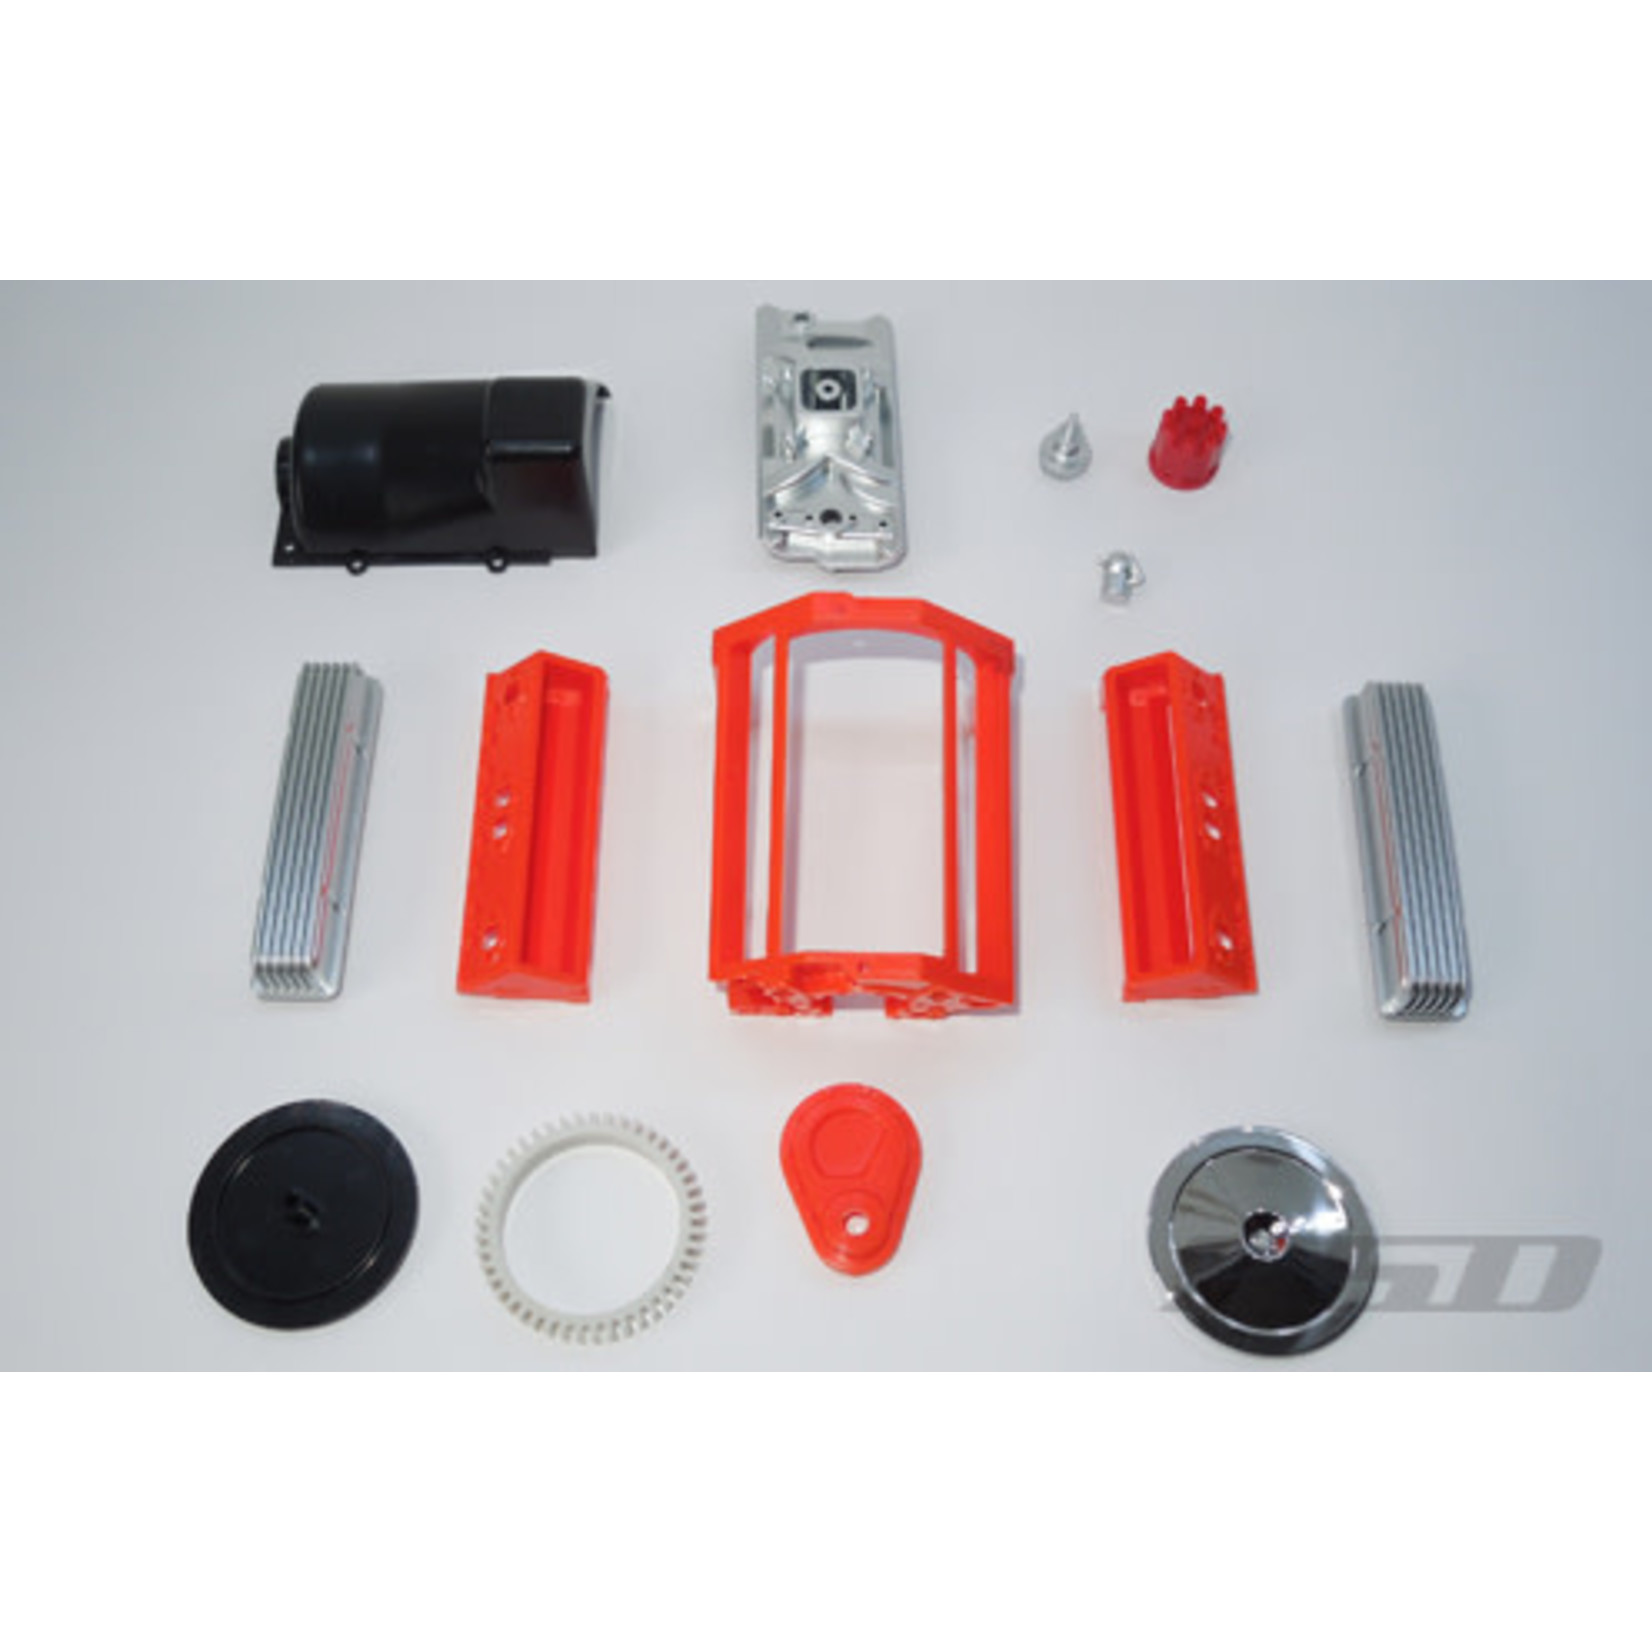 SSD RC 1/10 Scale V8 Engine Motor Cover Set